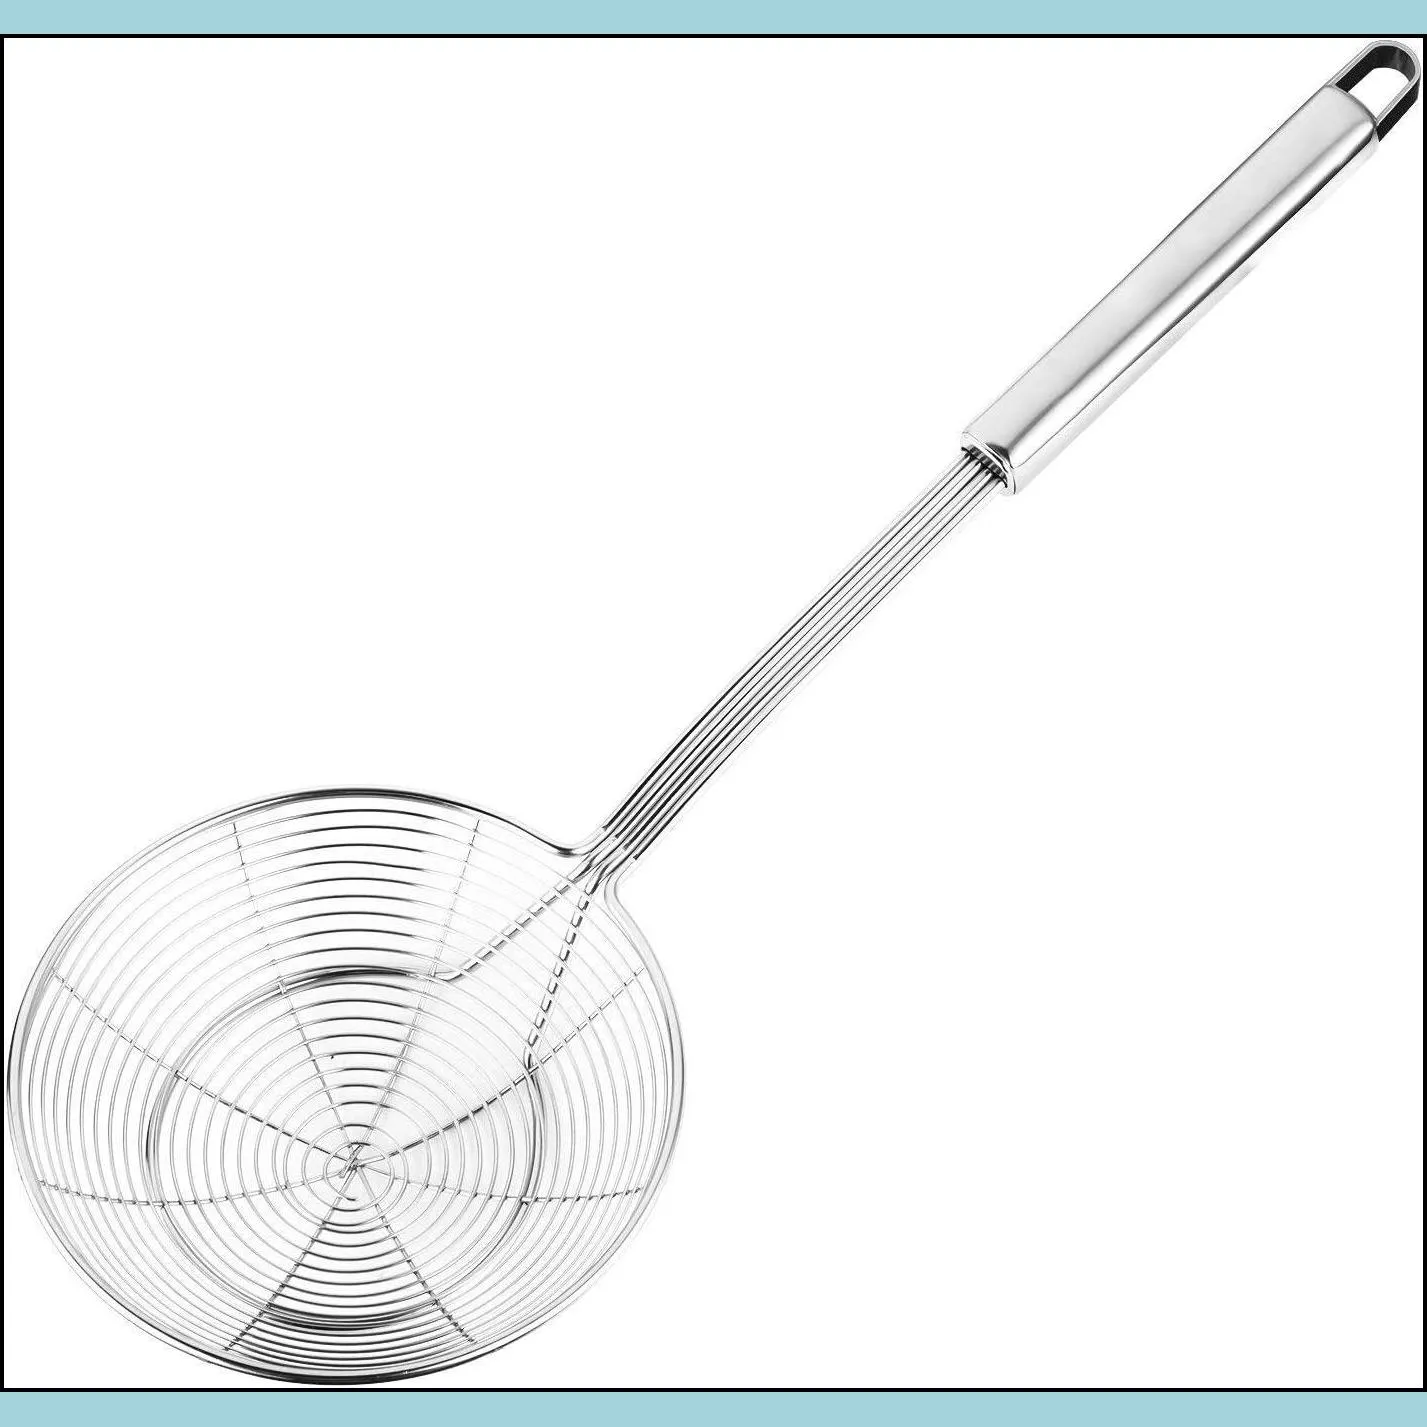  solid stainless steel spider strainer skimmer ladle for cooking and frying kitchen utensils wire pasta strainer spoon